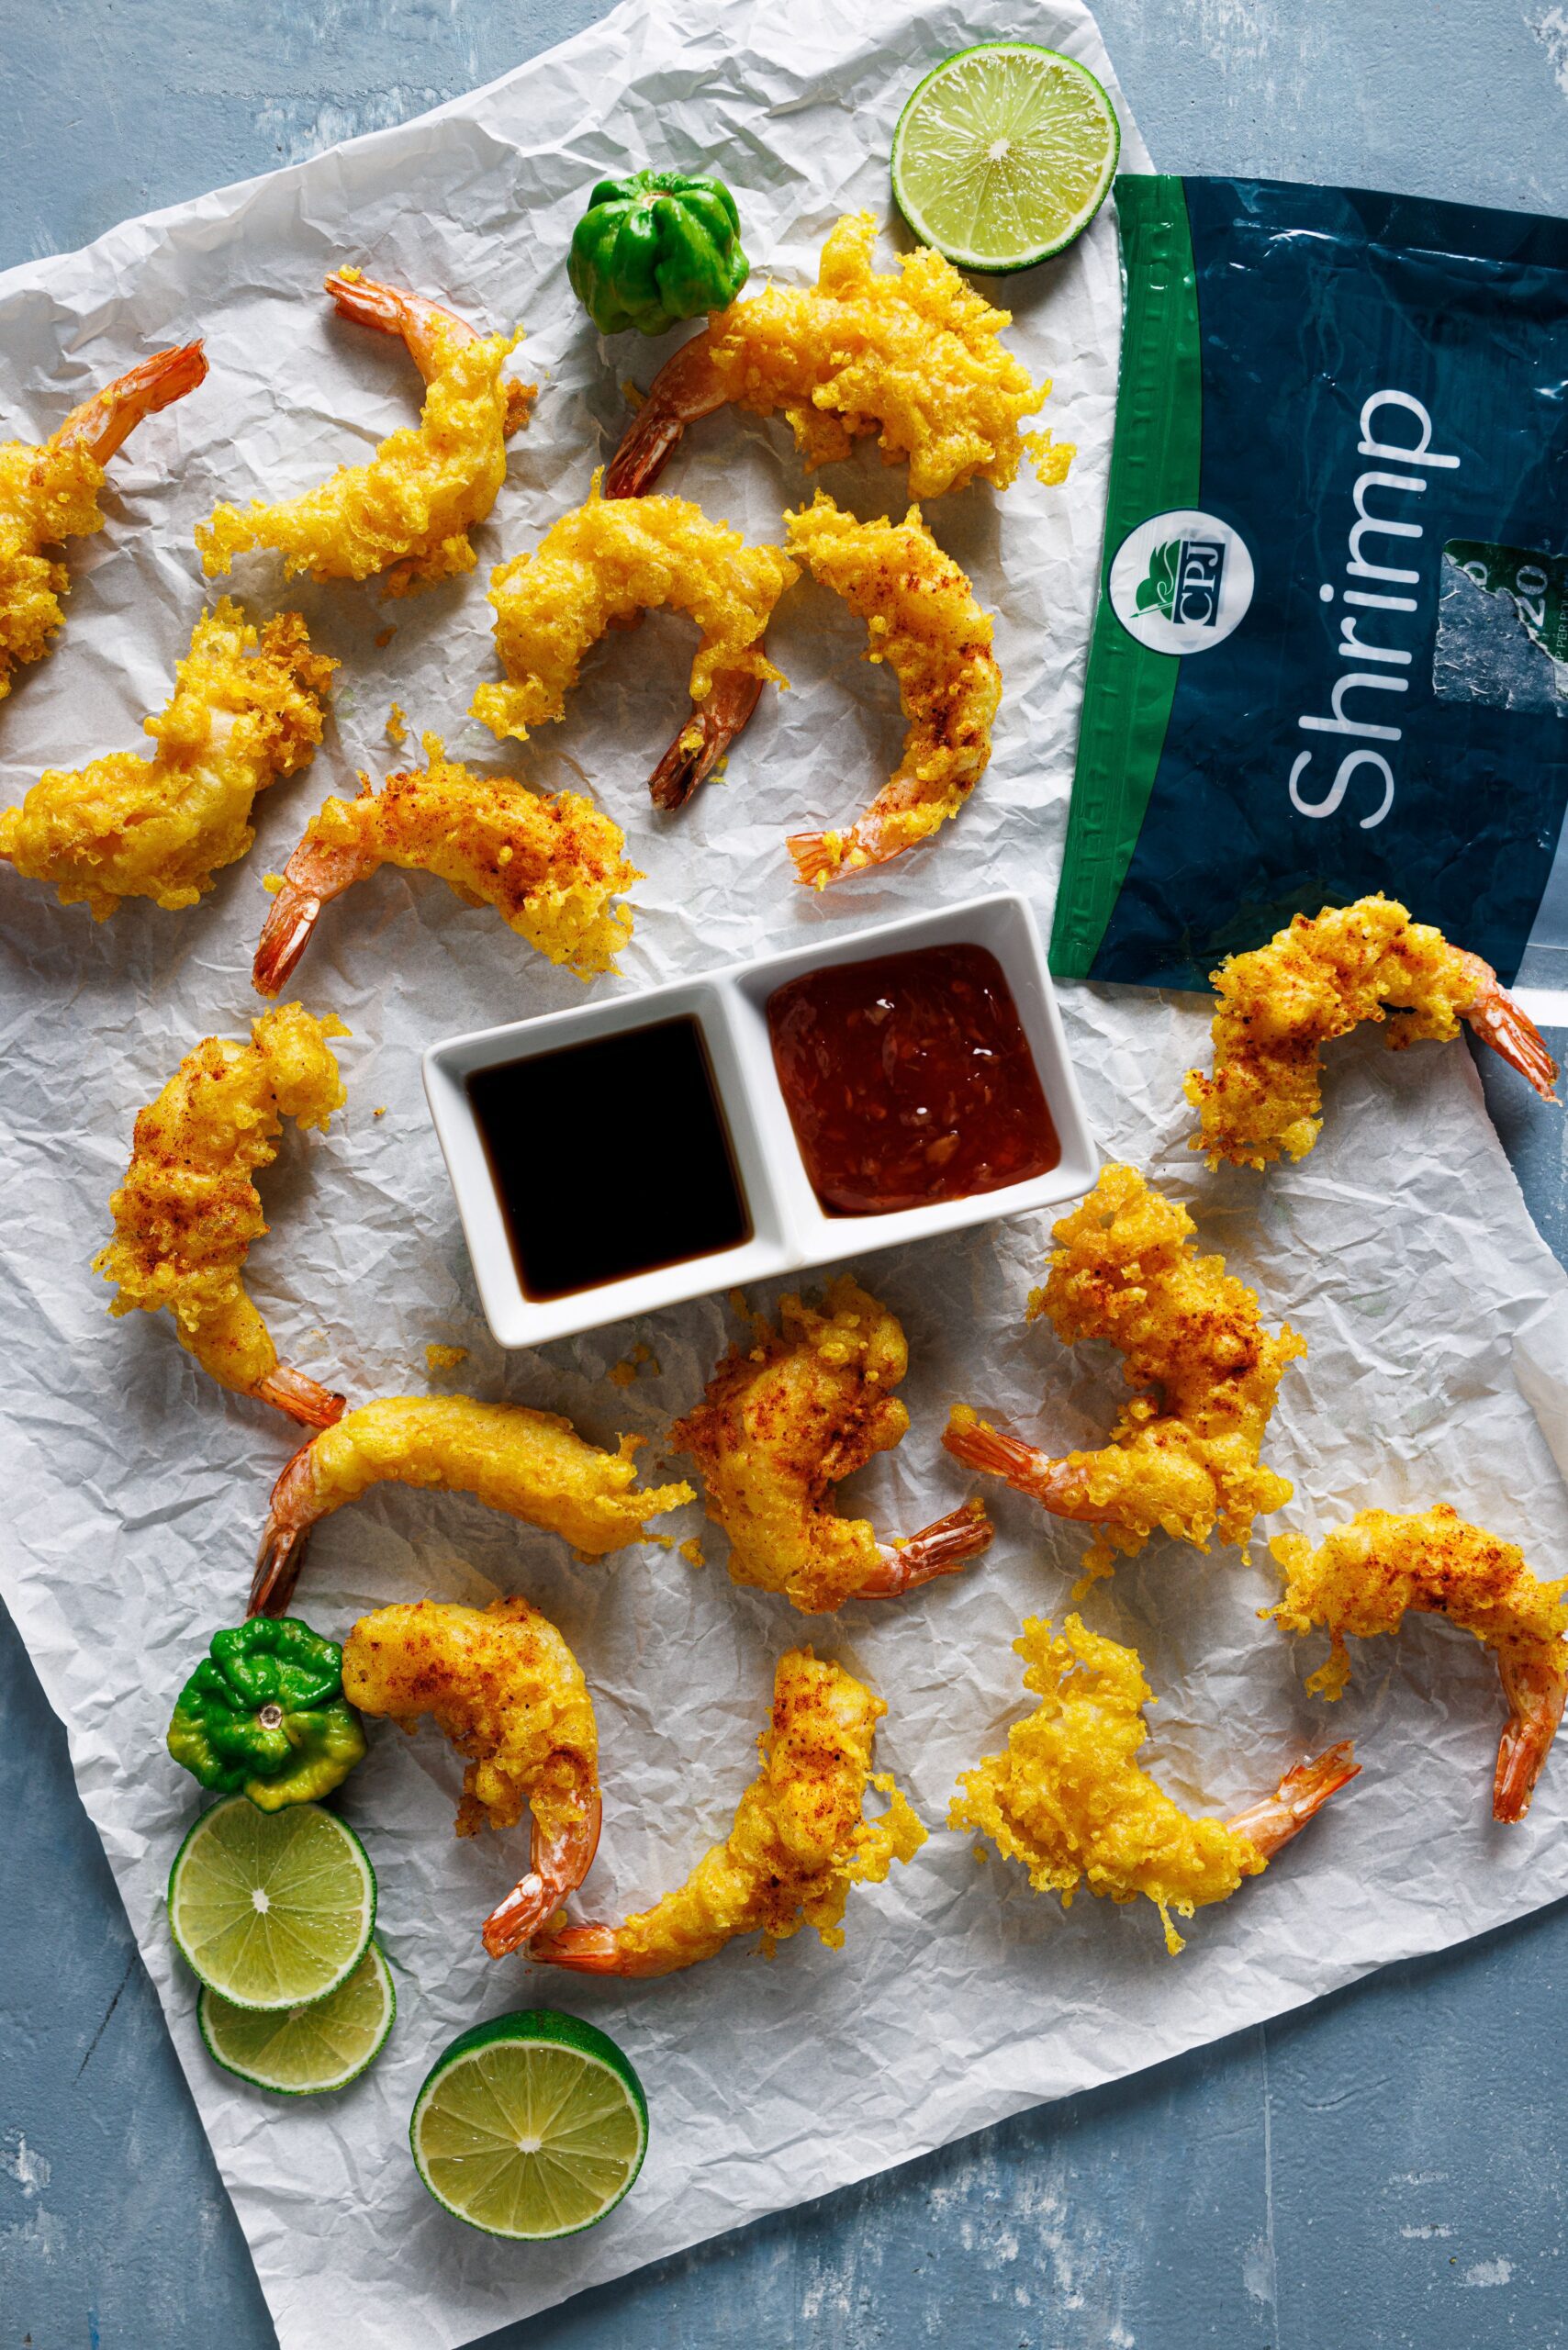 an overhead image of about one dozen fried shrimp tempura placed on a wax paper with dipping sauce in the middle